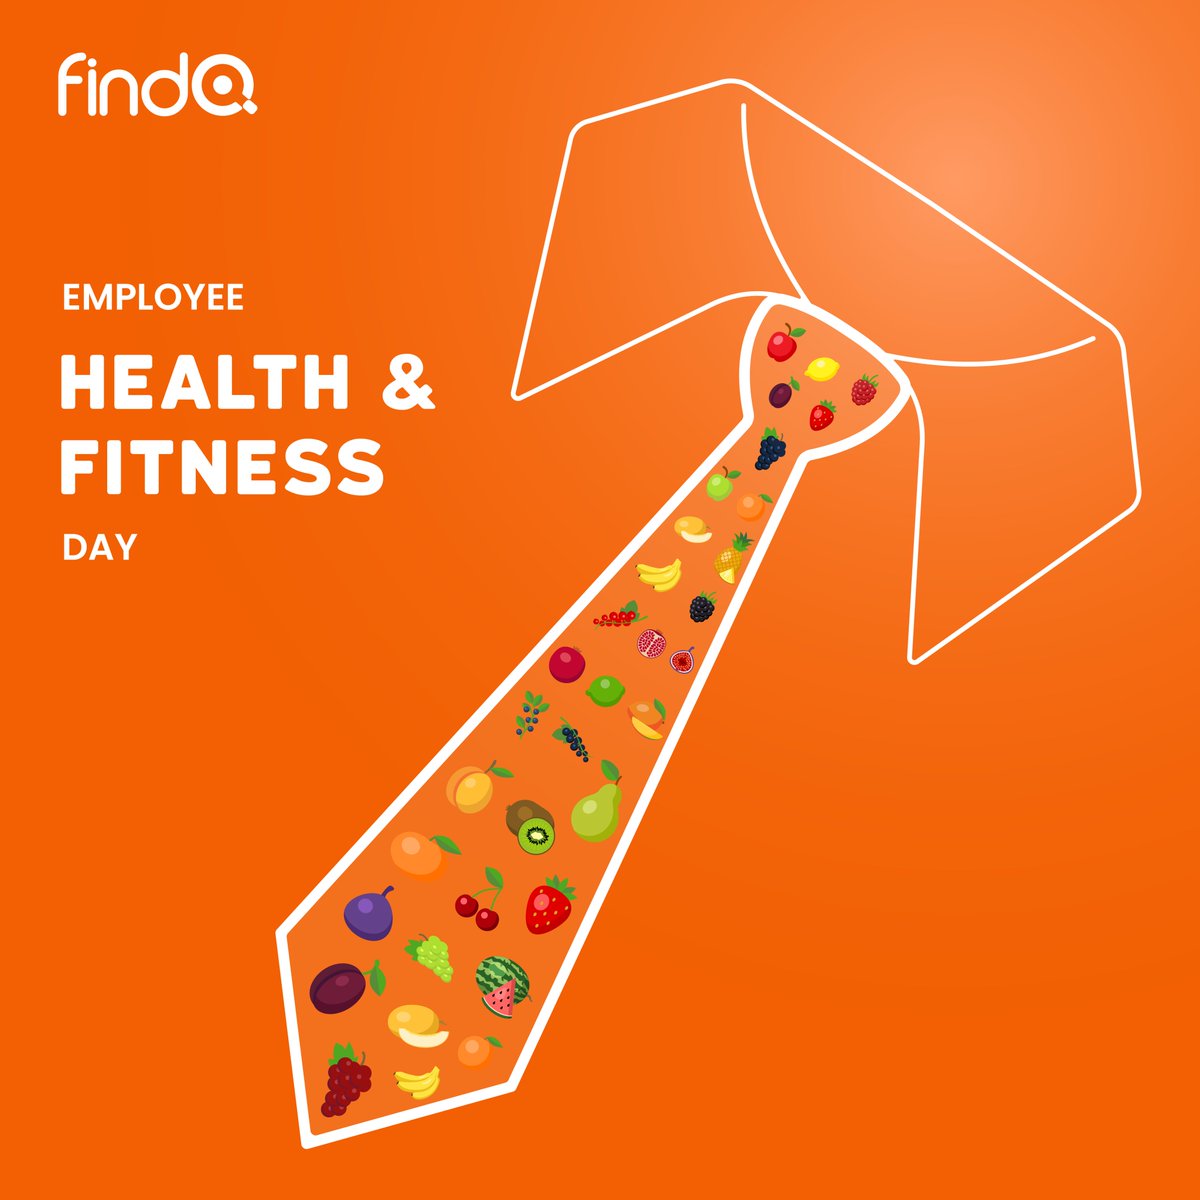 Let's get moving to enjoy the health perks of staying active at work! This observance promotes workplace wellness, urging both employees and employers to focus on fitness and health. Let's prioritize our health and fitness at work #findq #employeewellness #recruiters #ITjobs